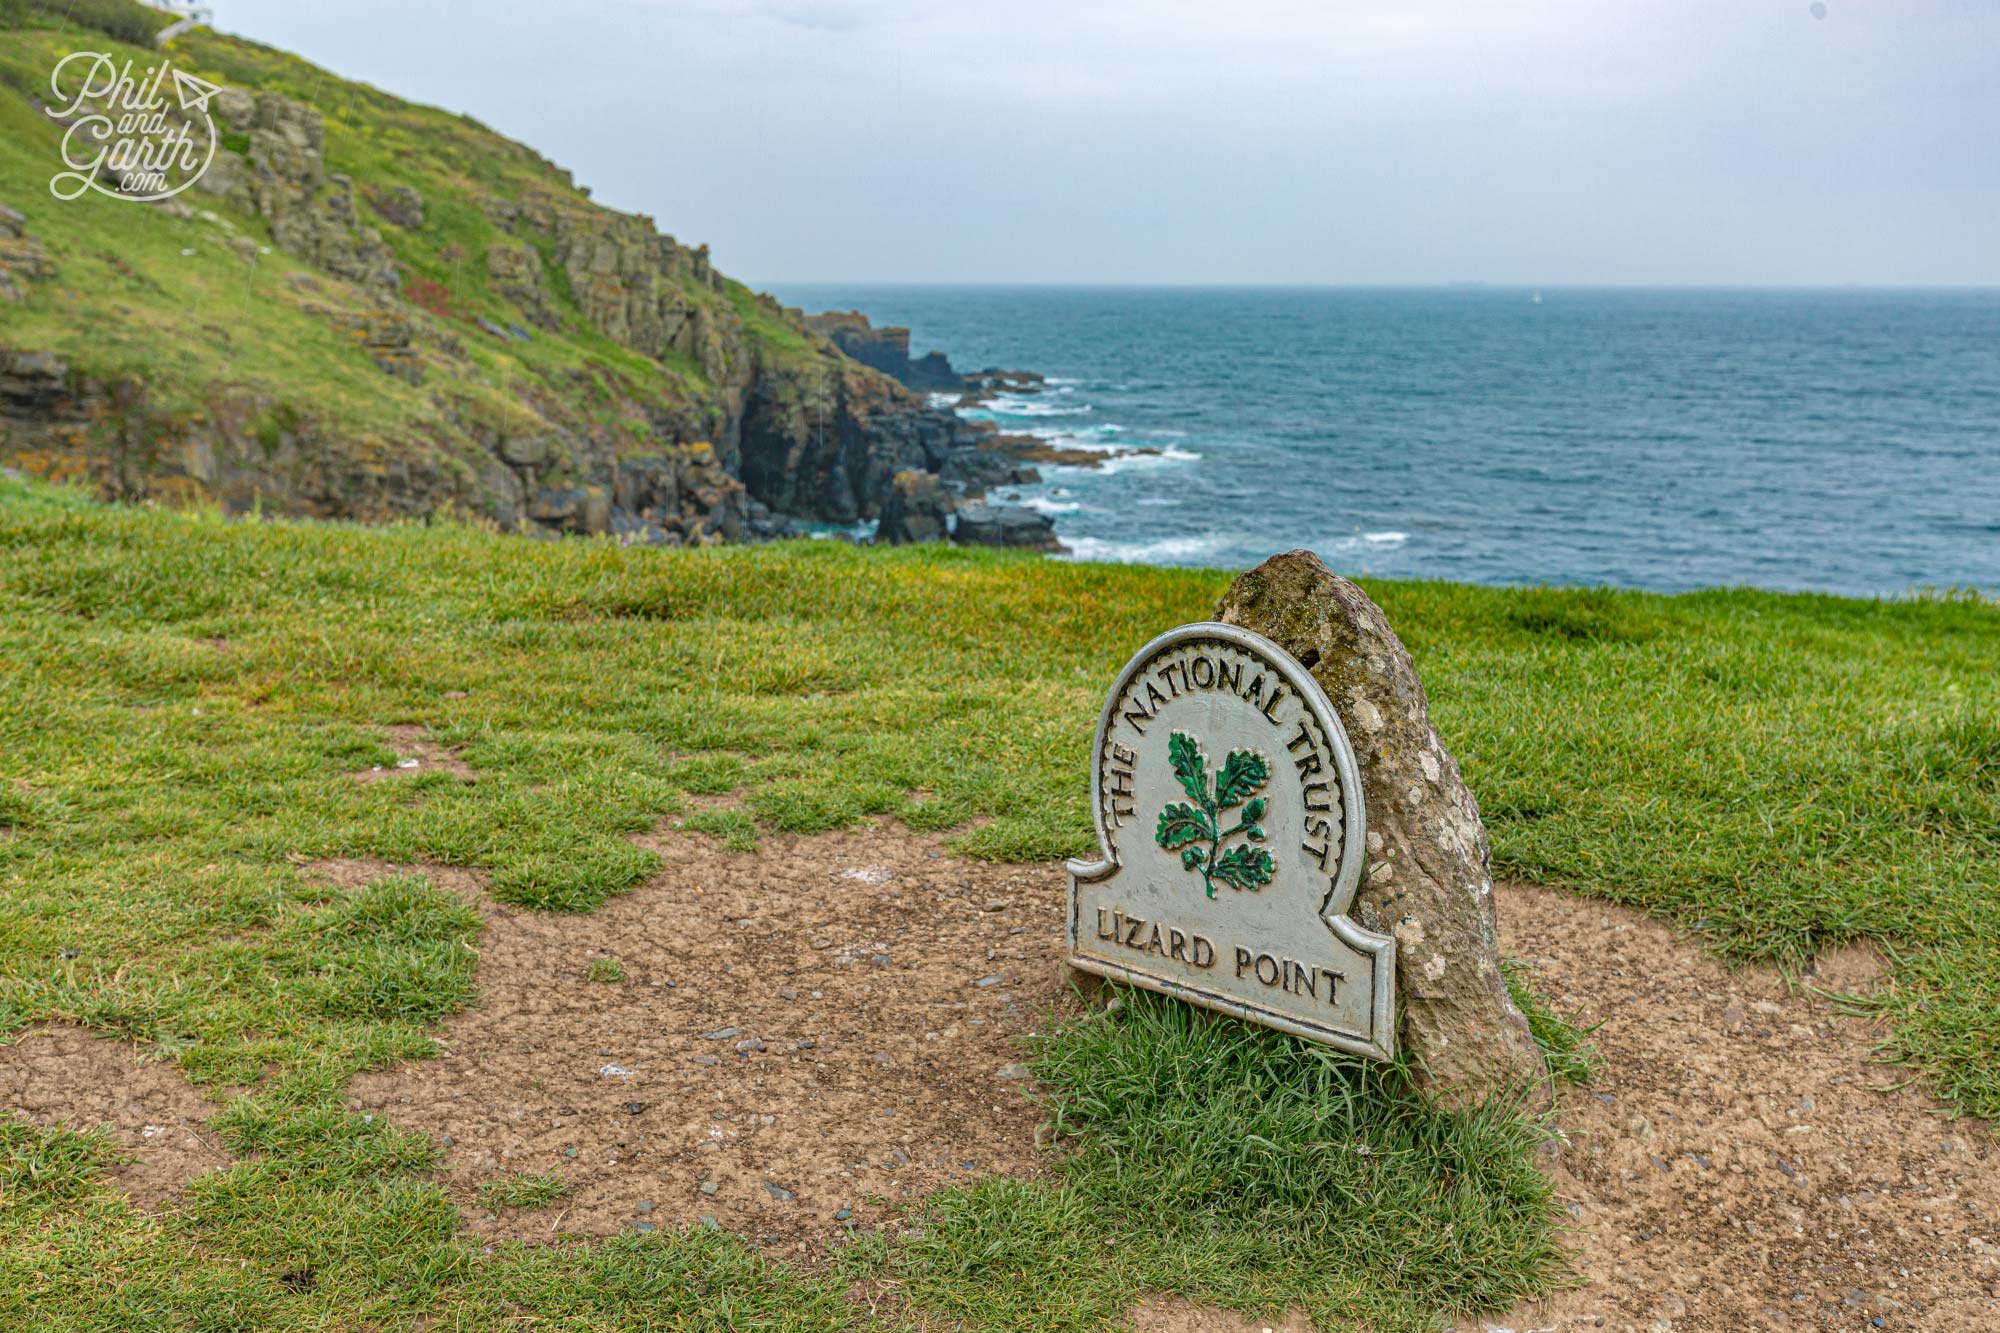 Lizard Point - the most southerly location on mainland Great Britain